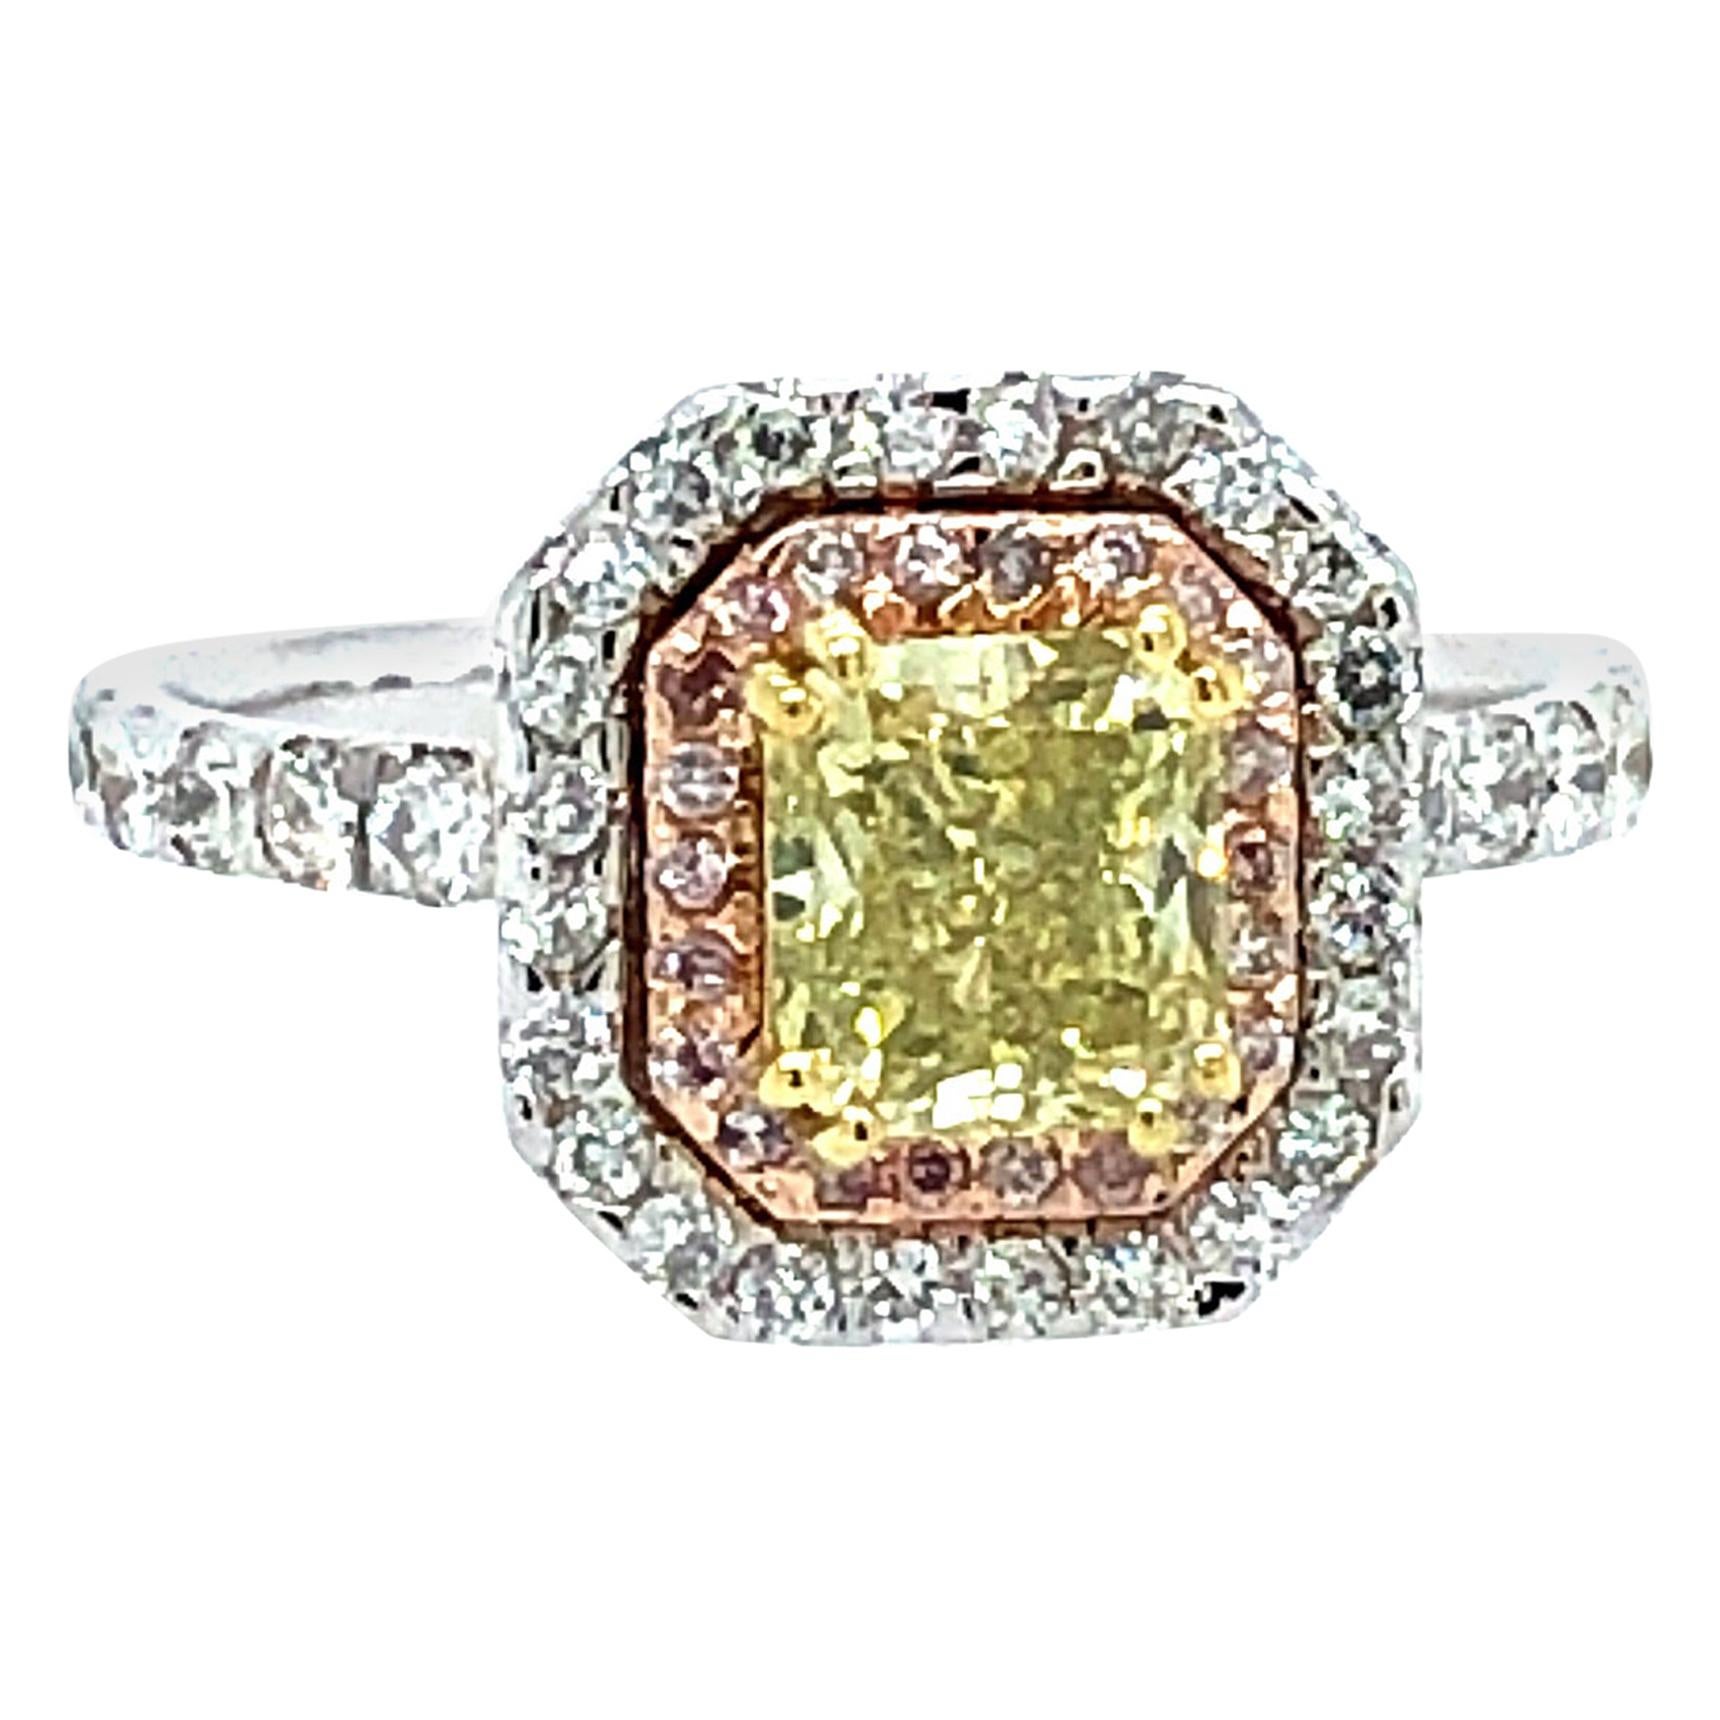 1.85 Carat Radiant GIA Cert Fancy Intense Yellow and Pink Diamond Ring 18kt Gold